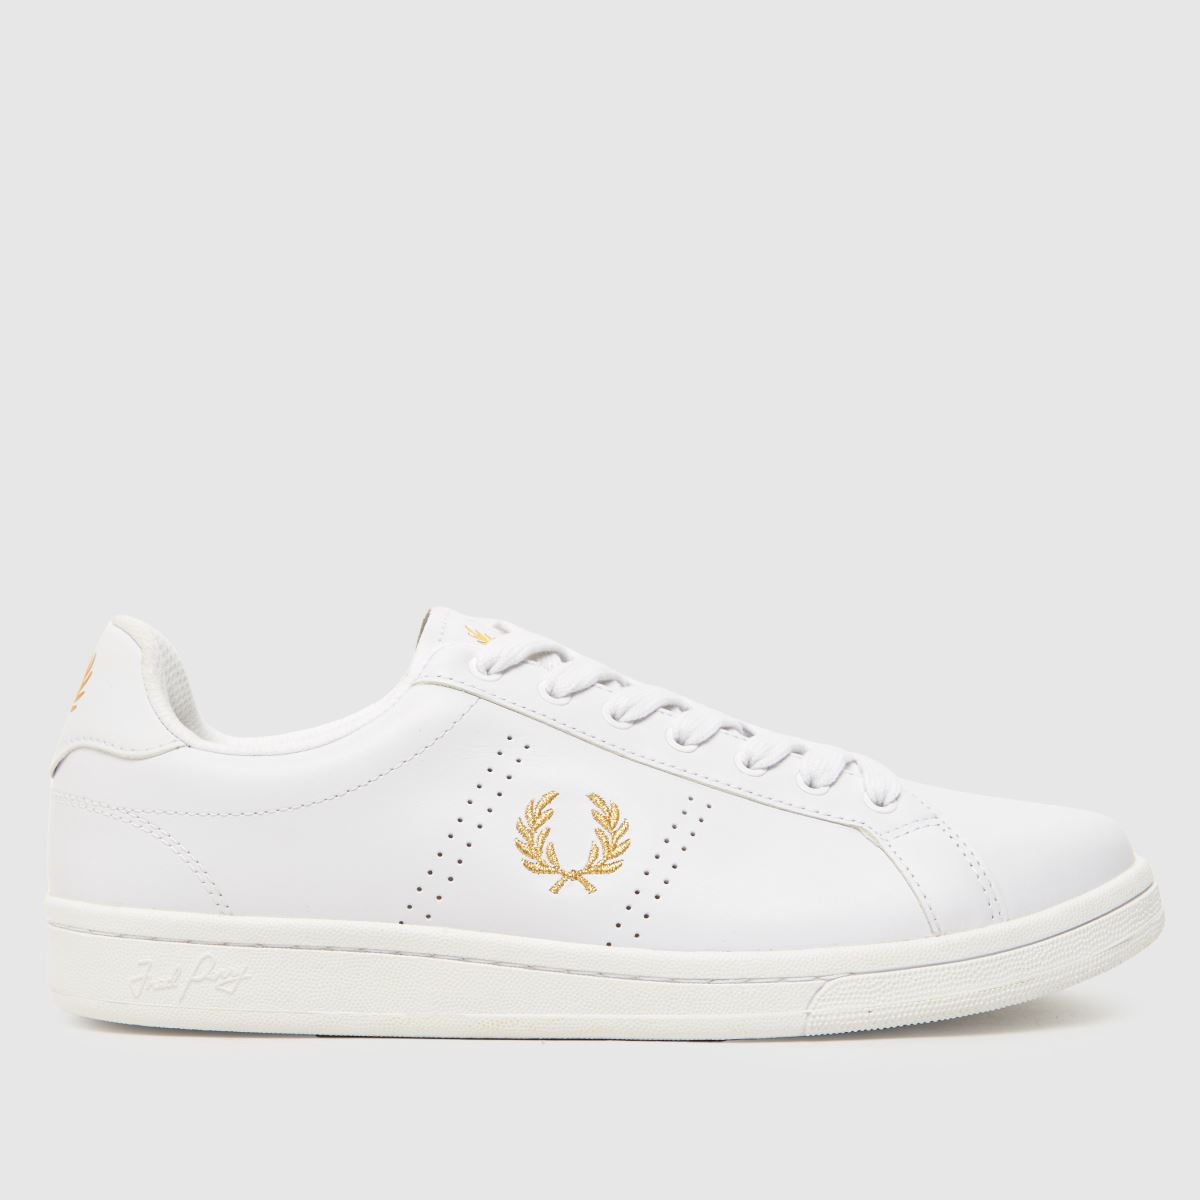 Fred Perry b721 trainers in white & gold